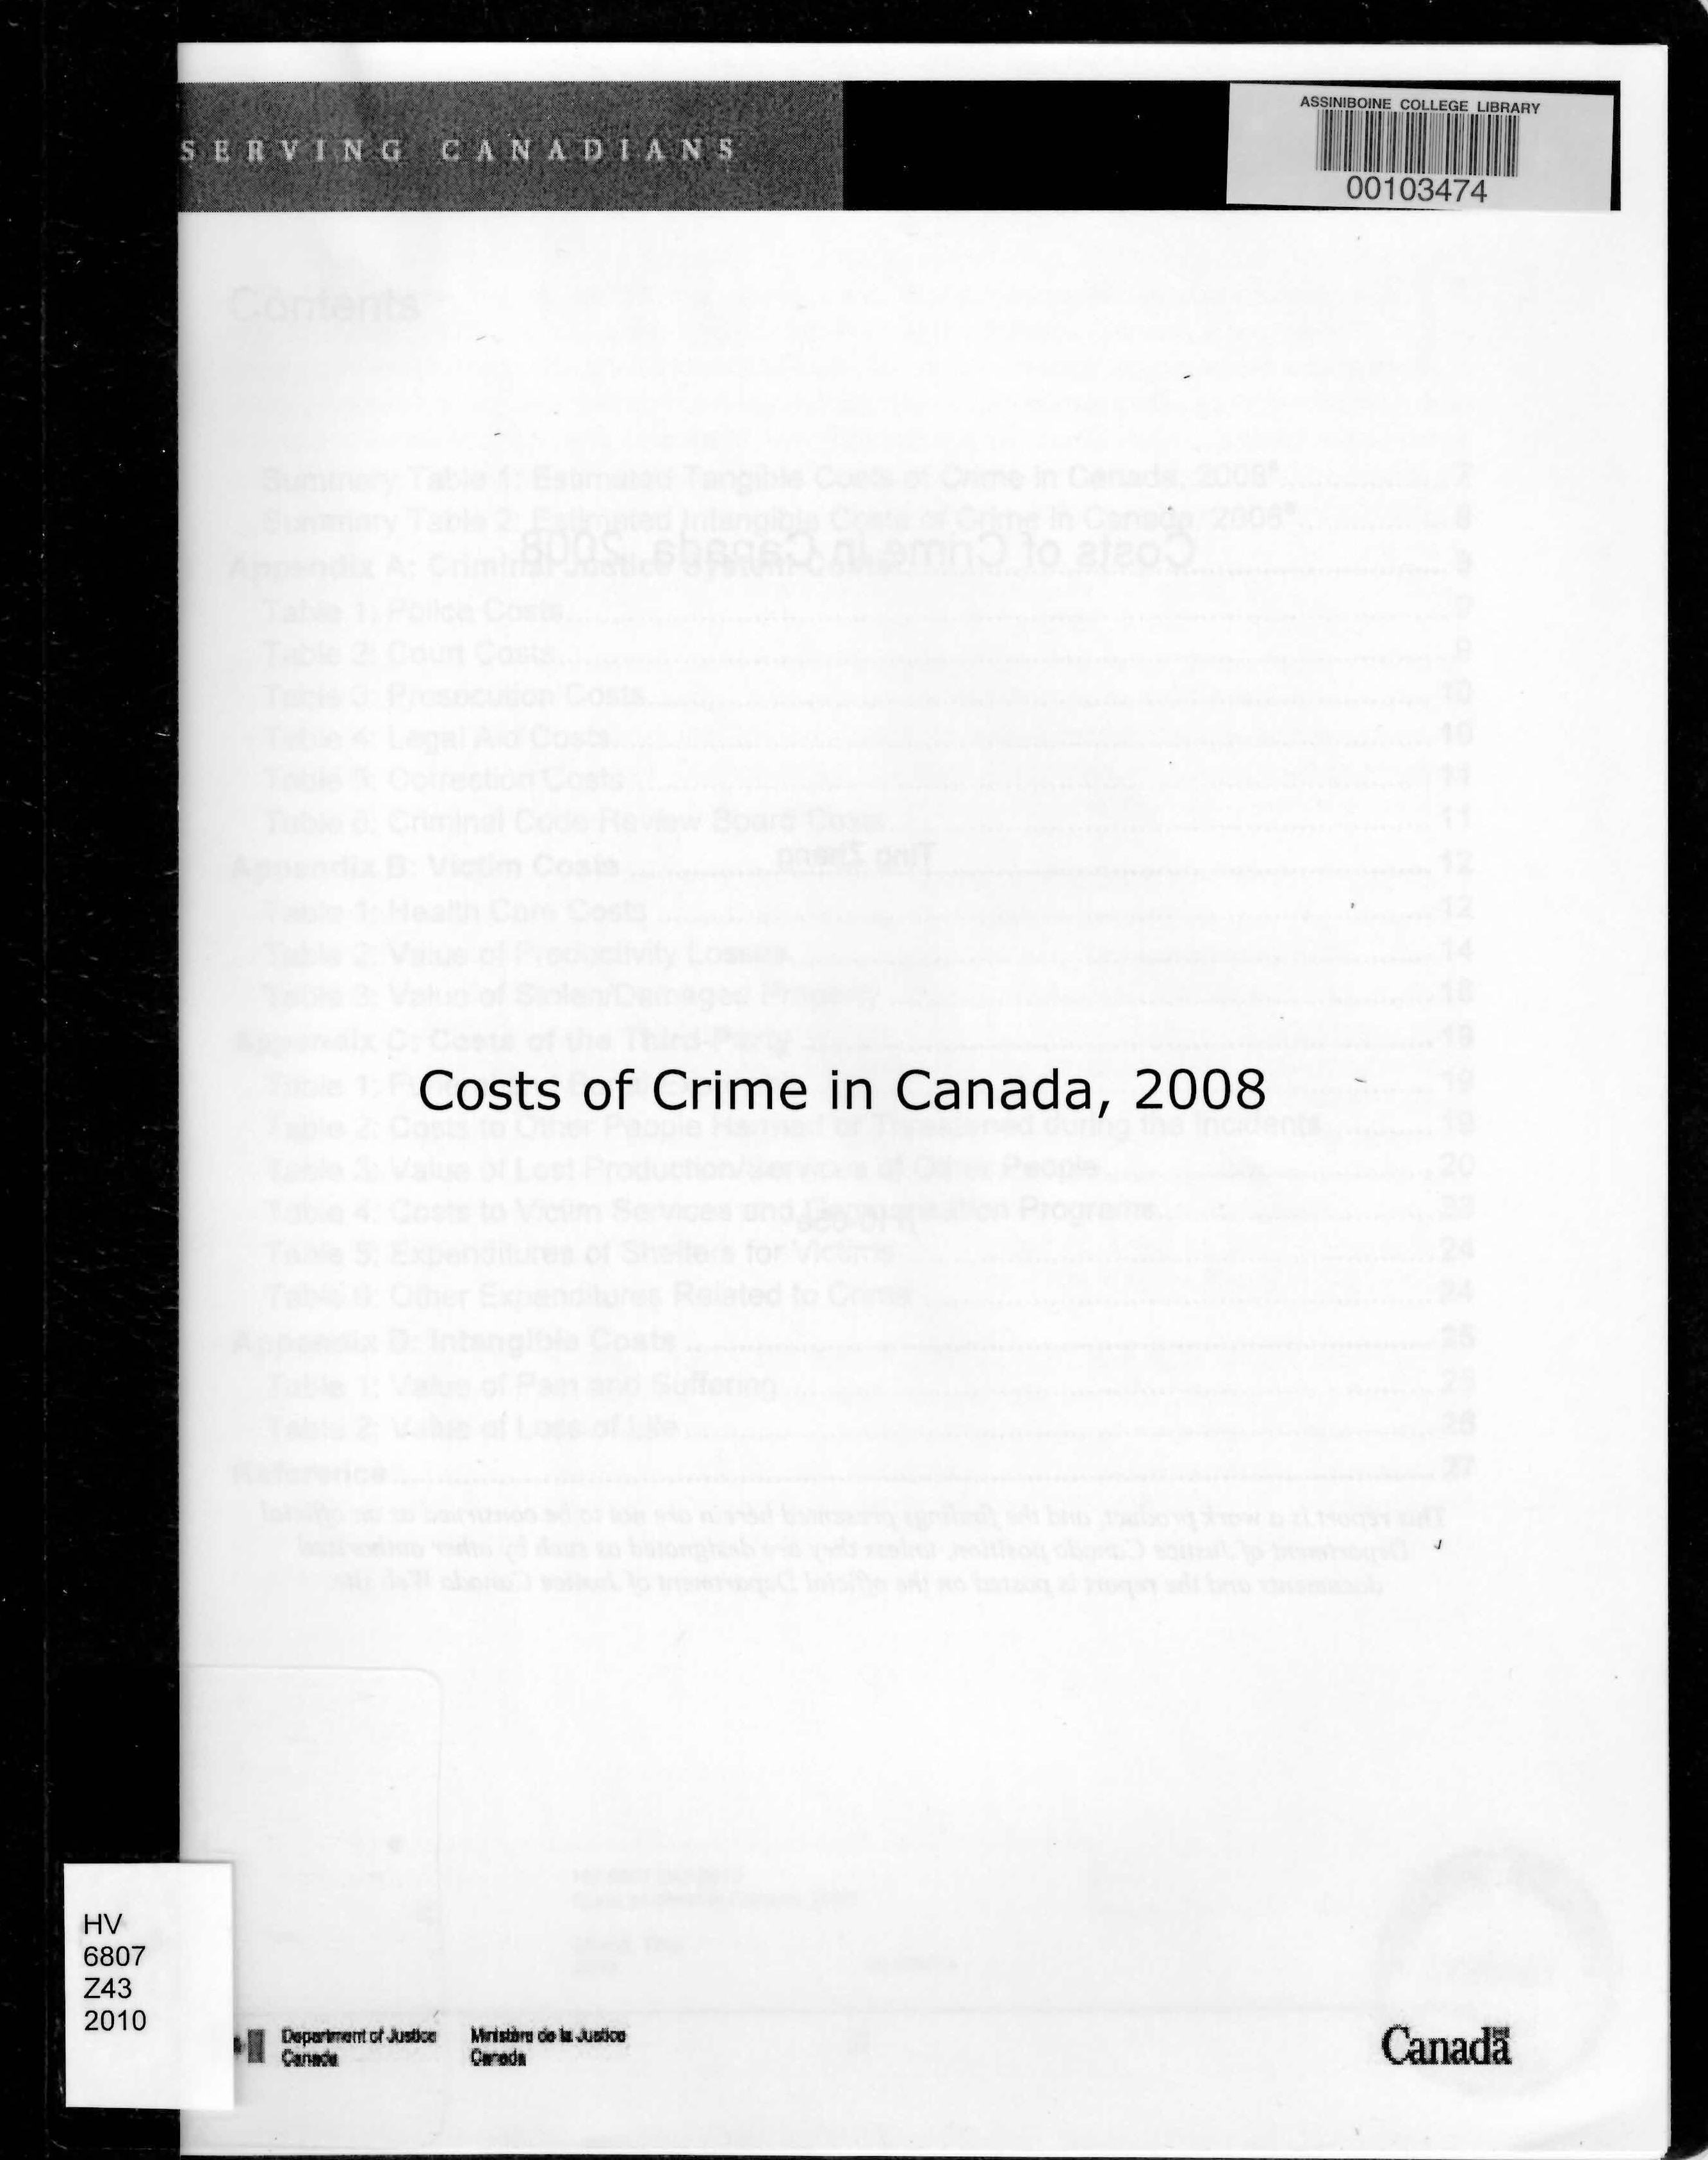 Costs of crime in Canada, 2008